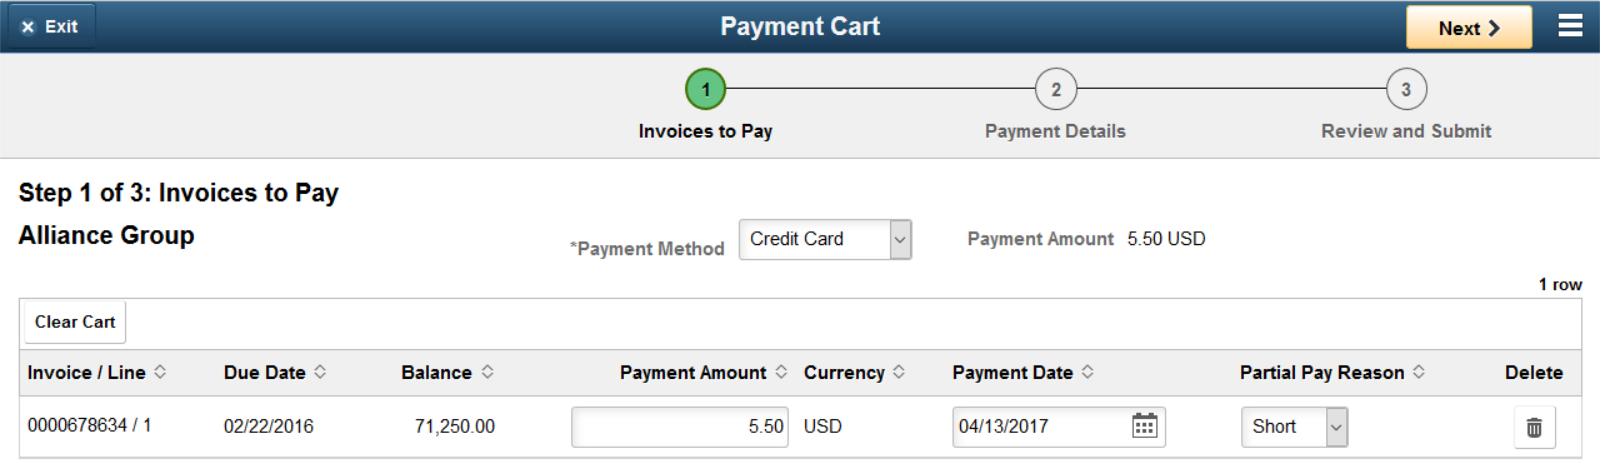 Step 1 of 3: Invoices to Pay page, using a credit card (LFF)